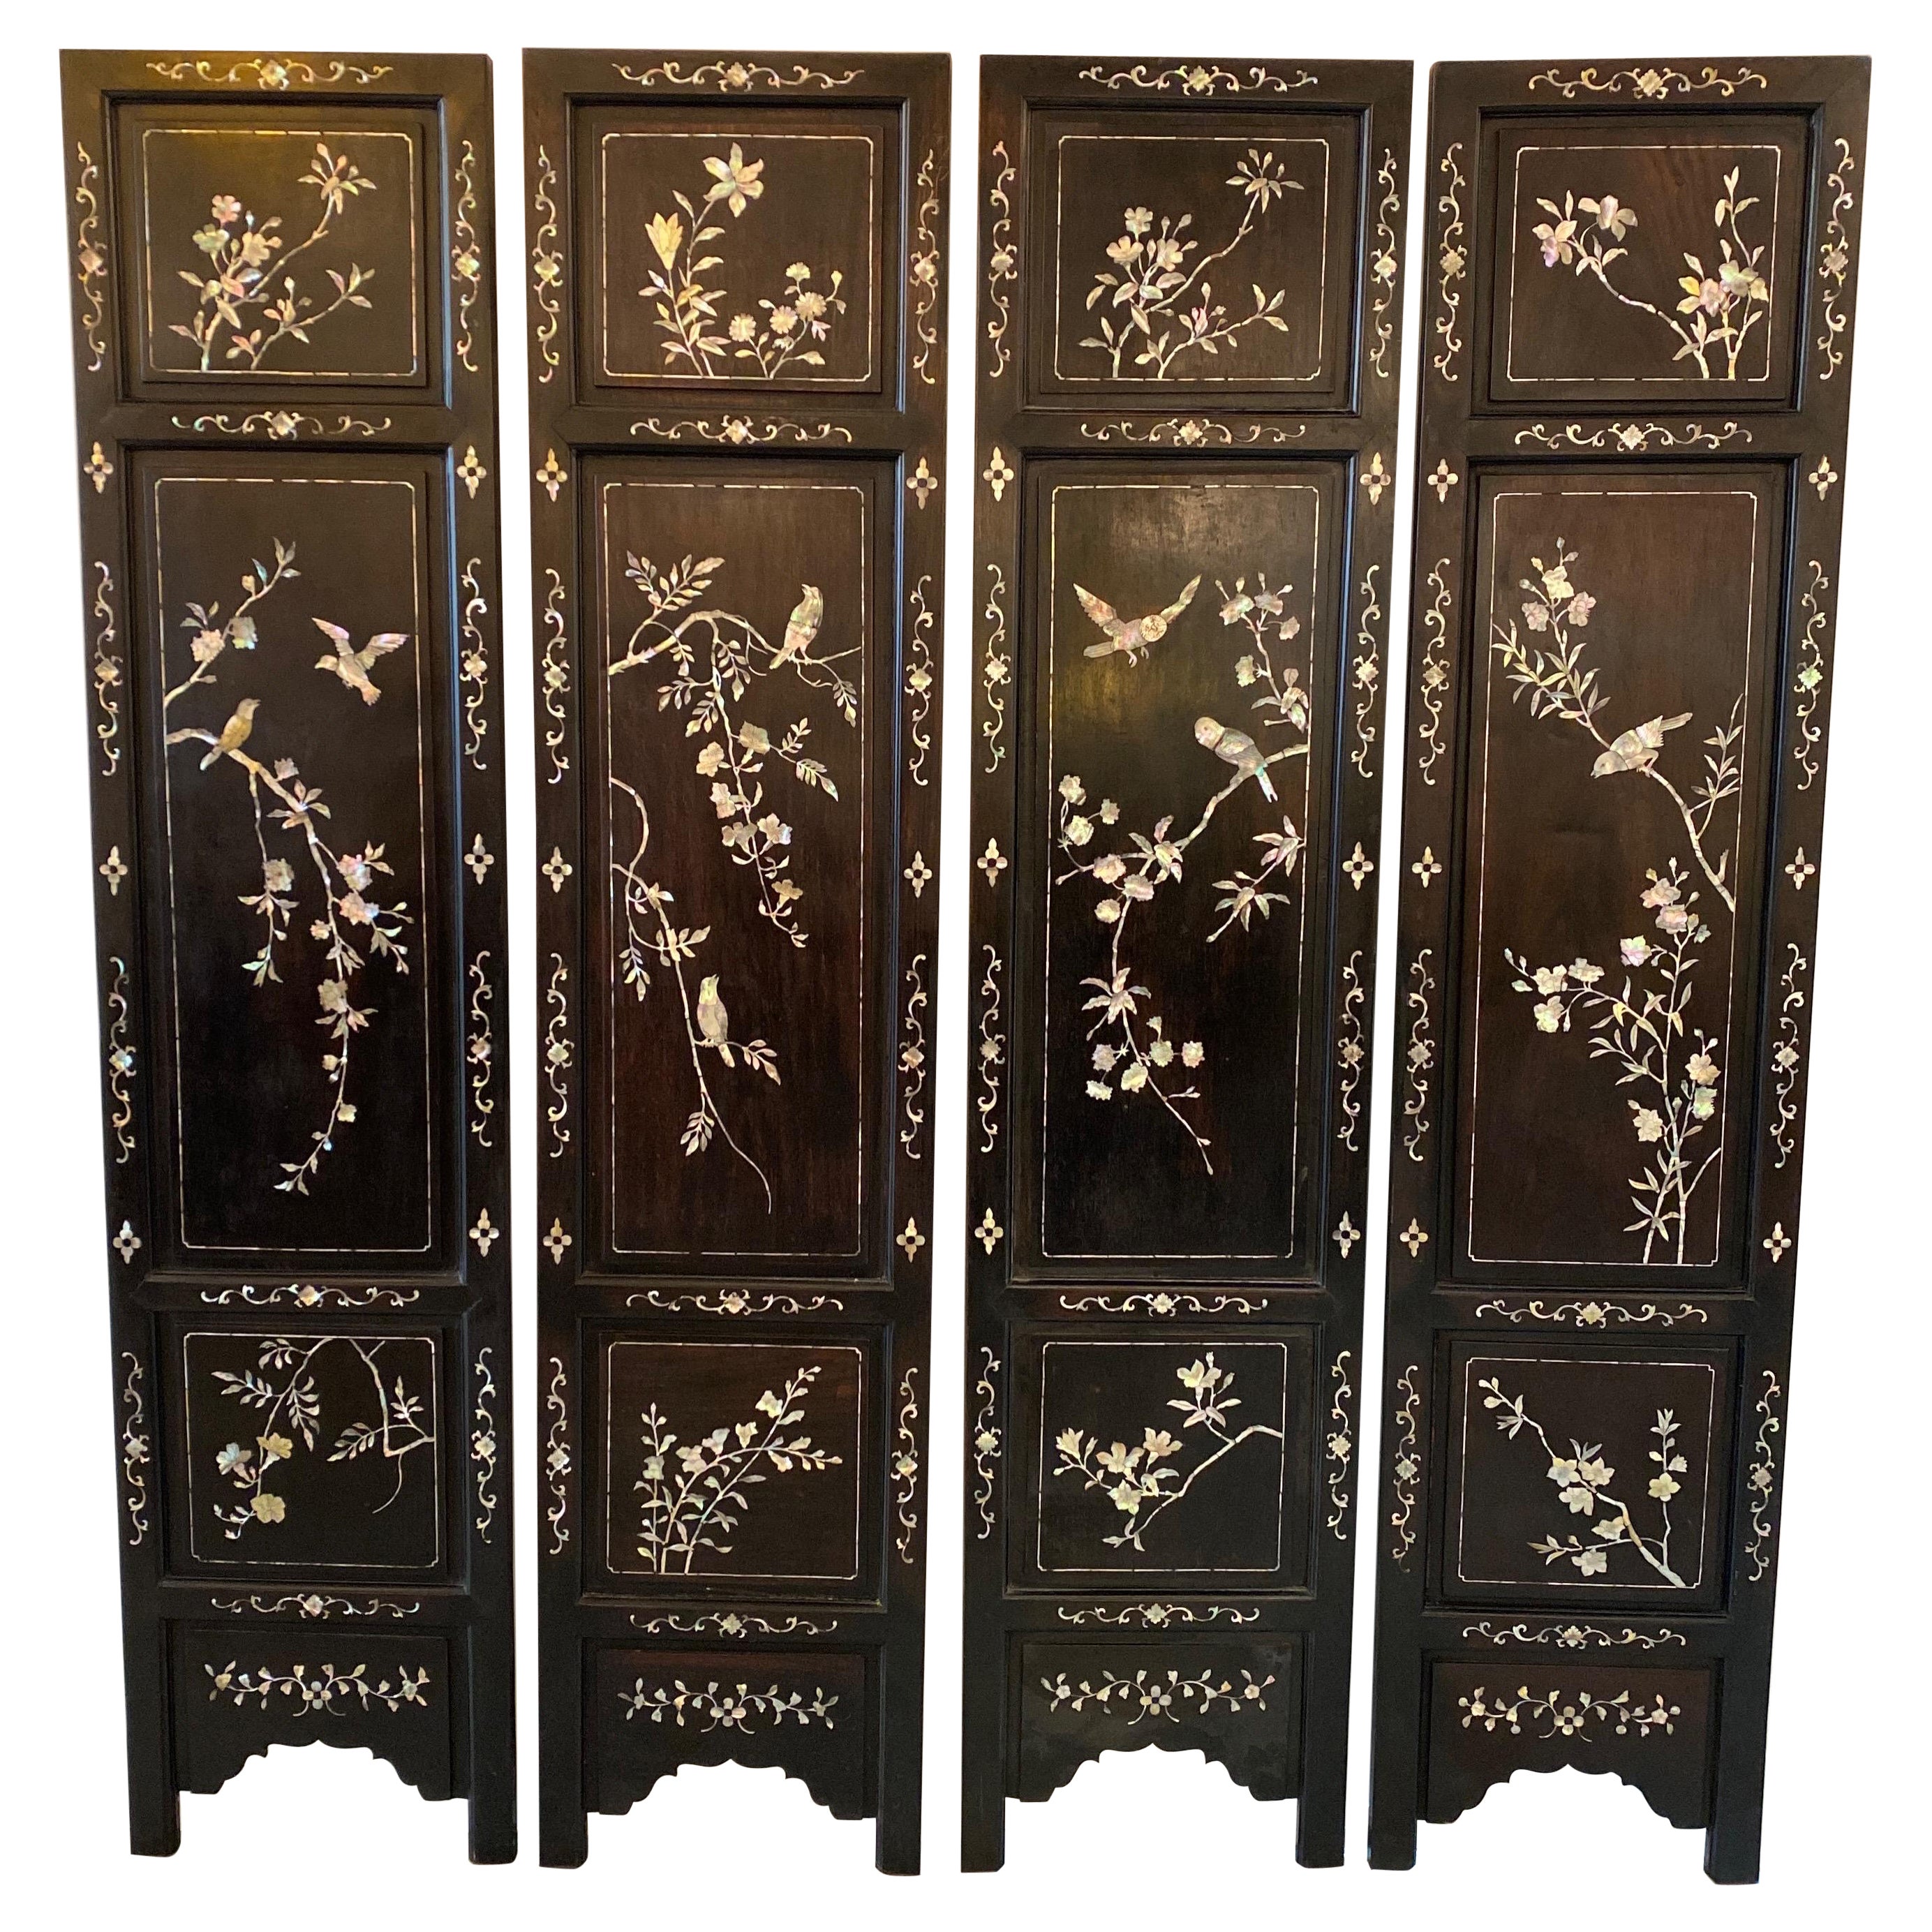 Four Chinese Hardwood and Mother of Pearl Inlaid Panels